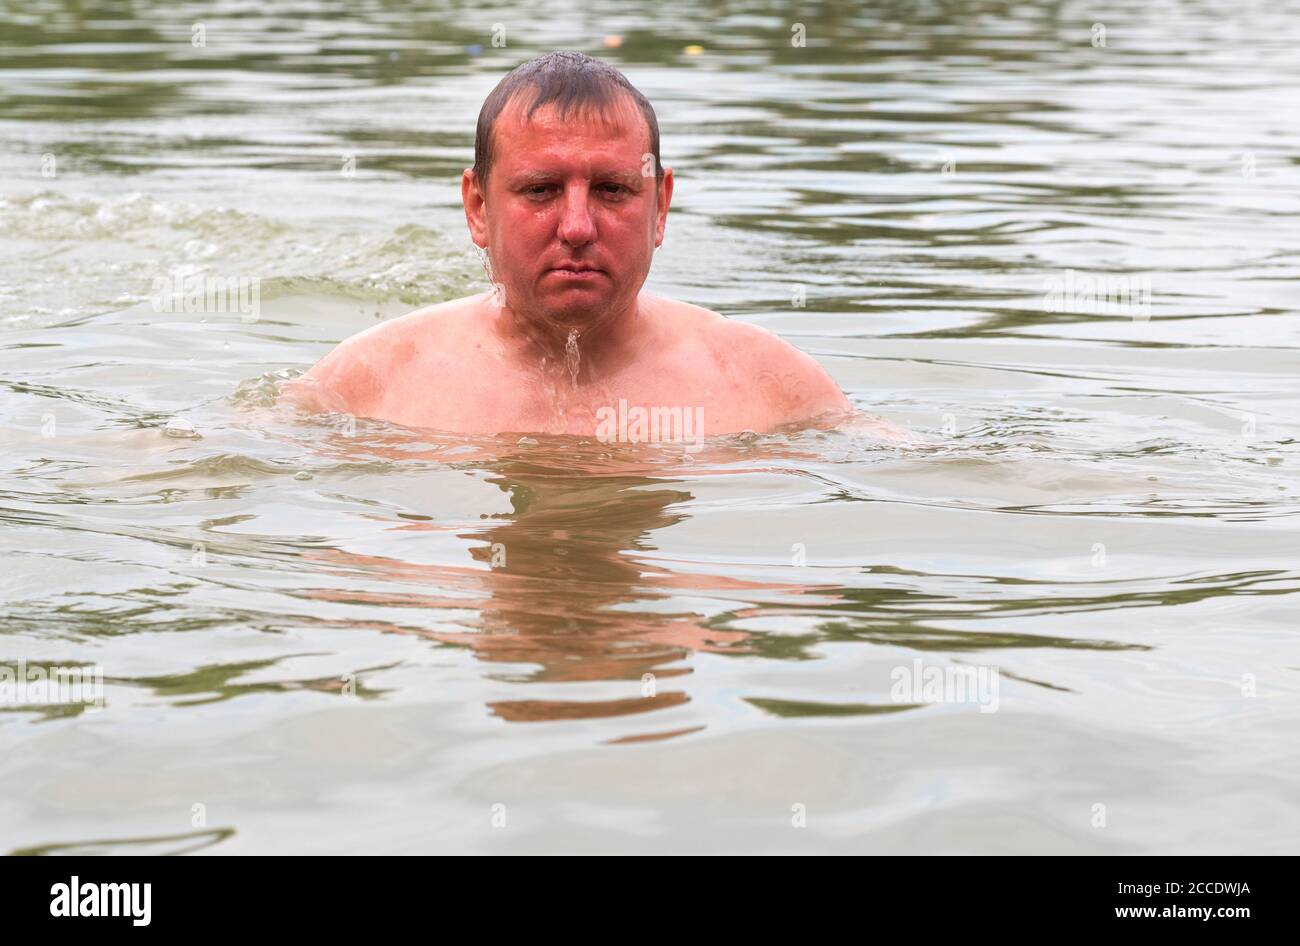 Water flows down the face of a young Caucasian man emerging from the lake  Stock Photo - Alamy